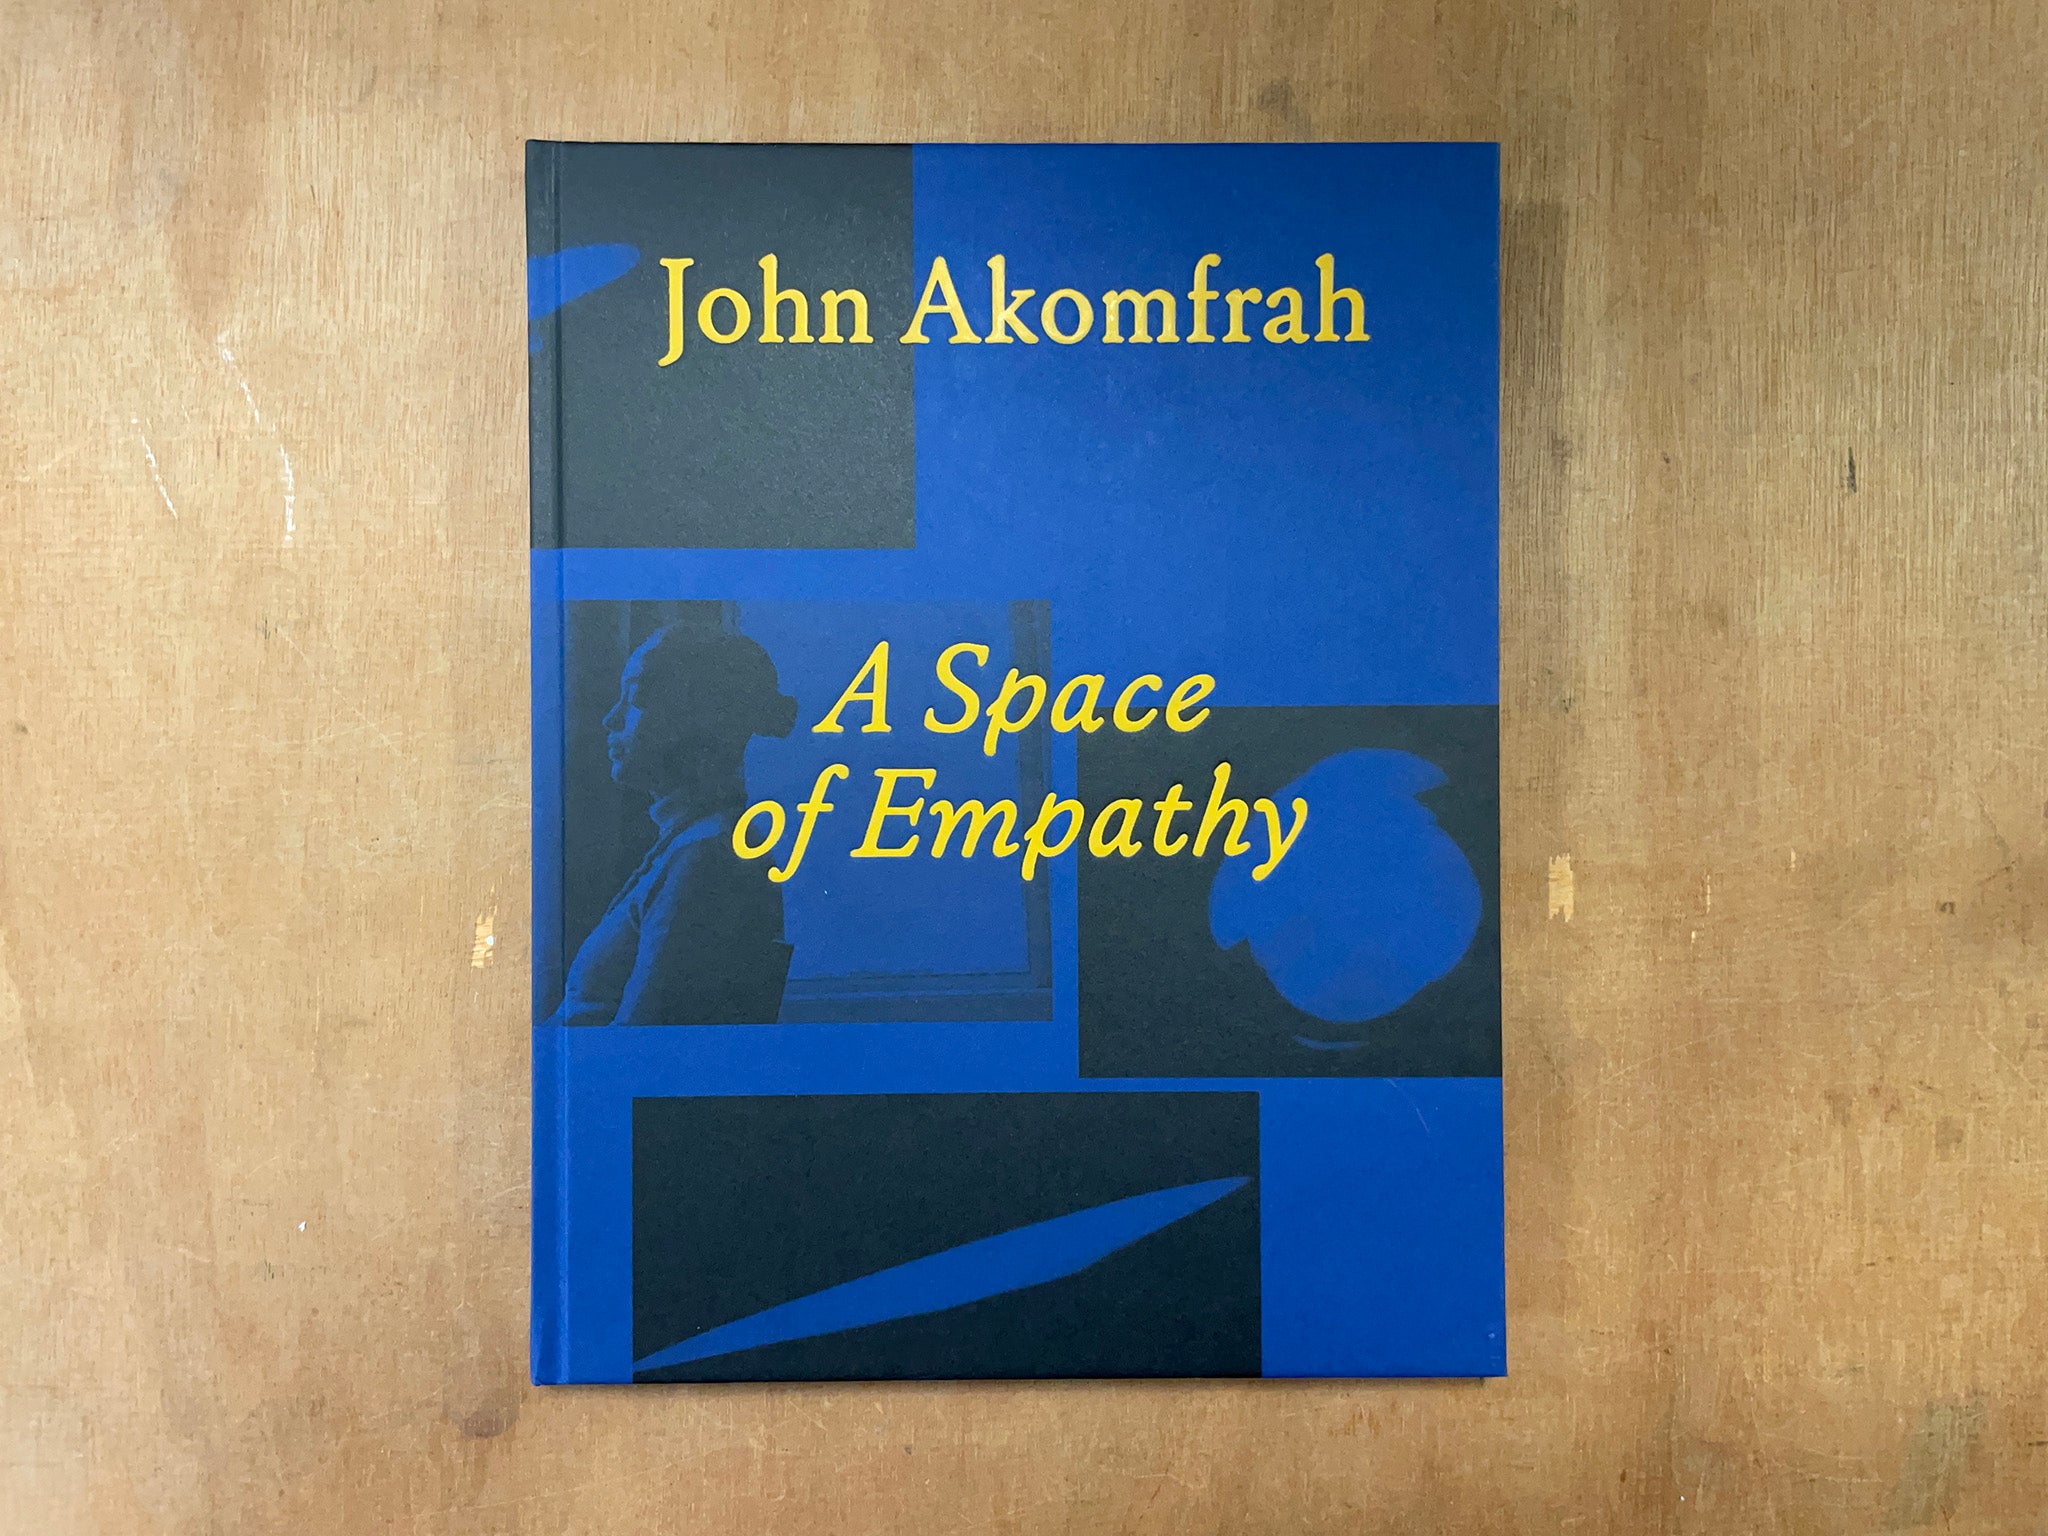 A SPACE FOR EMPATHY by John Akomfrah